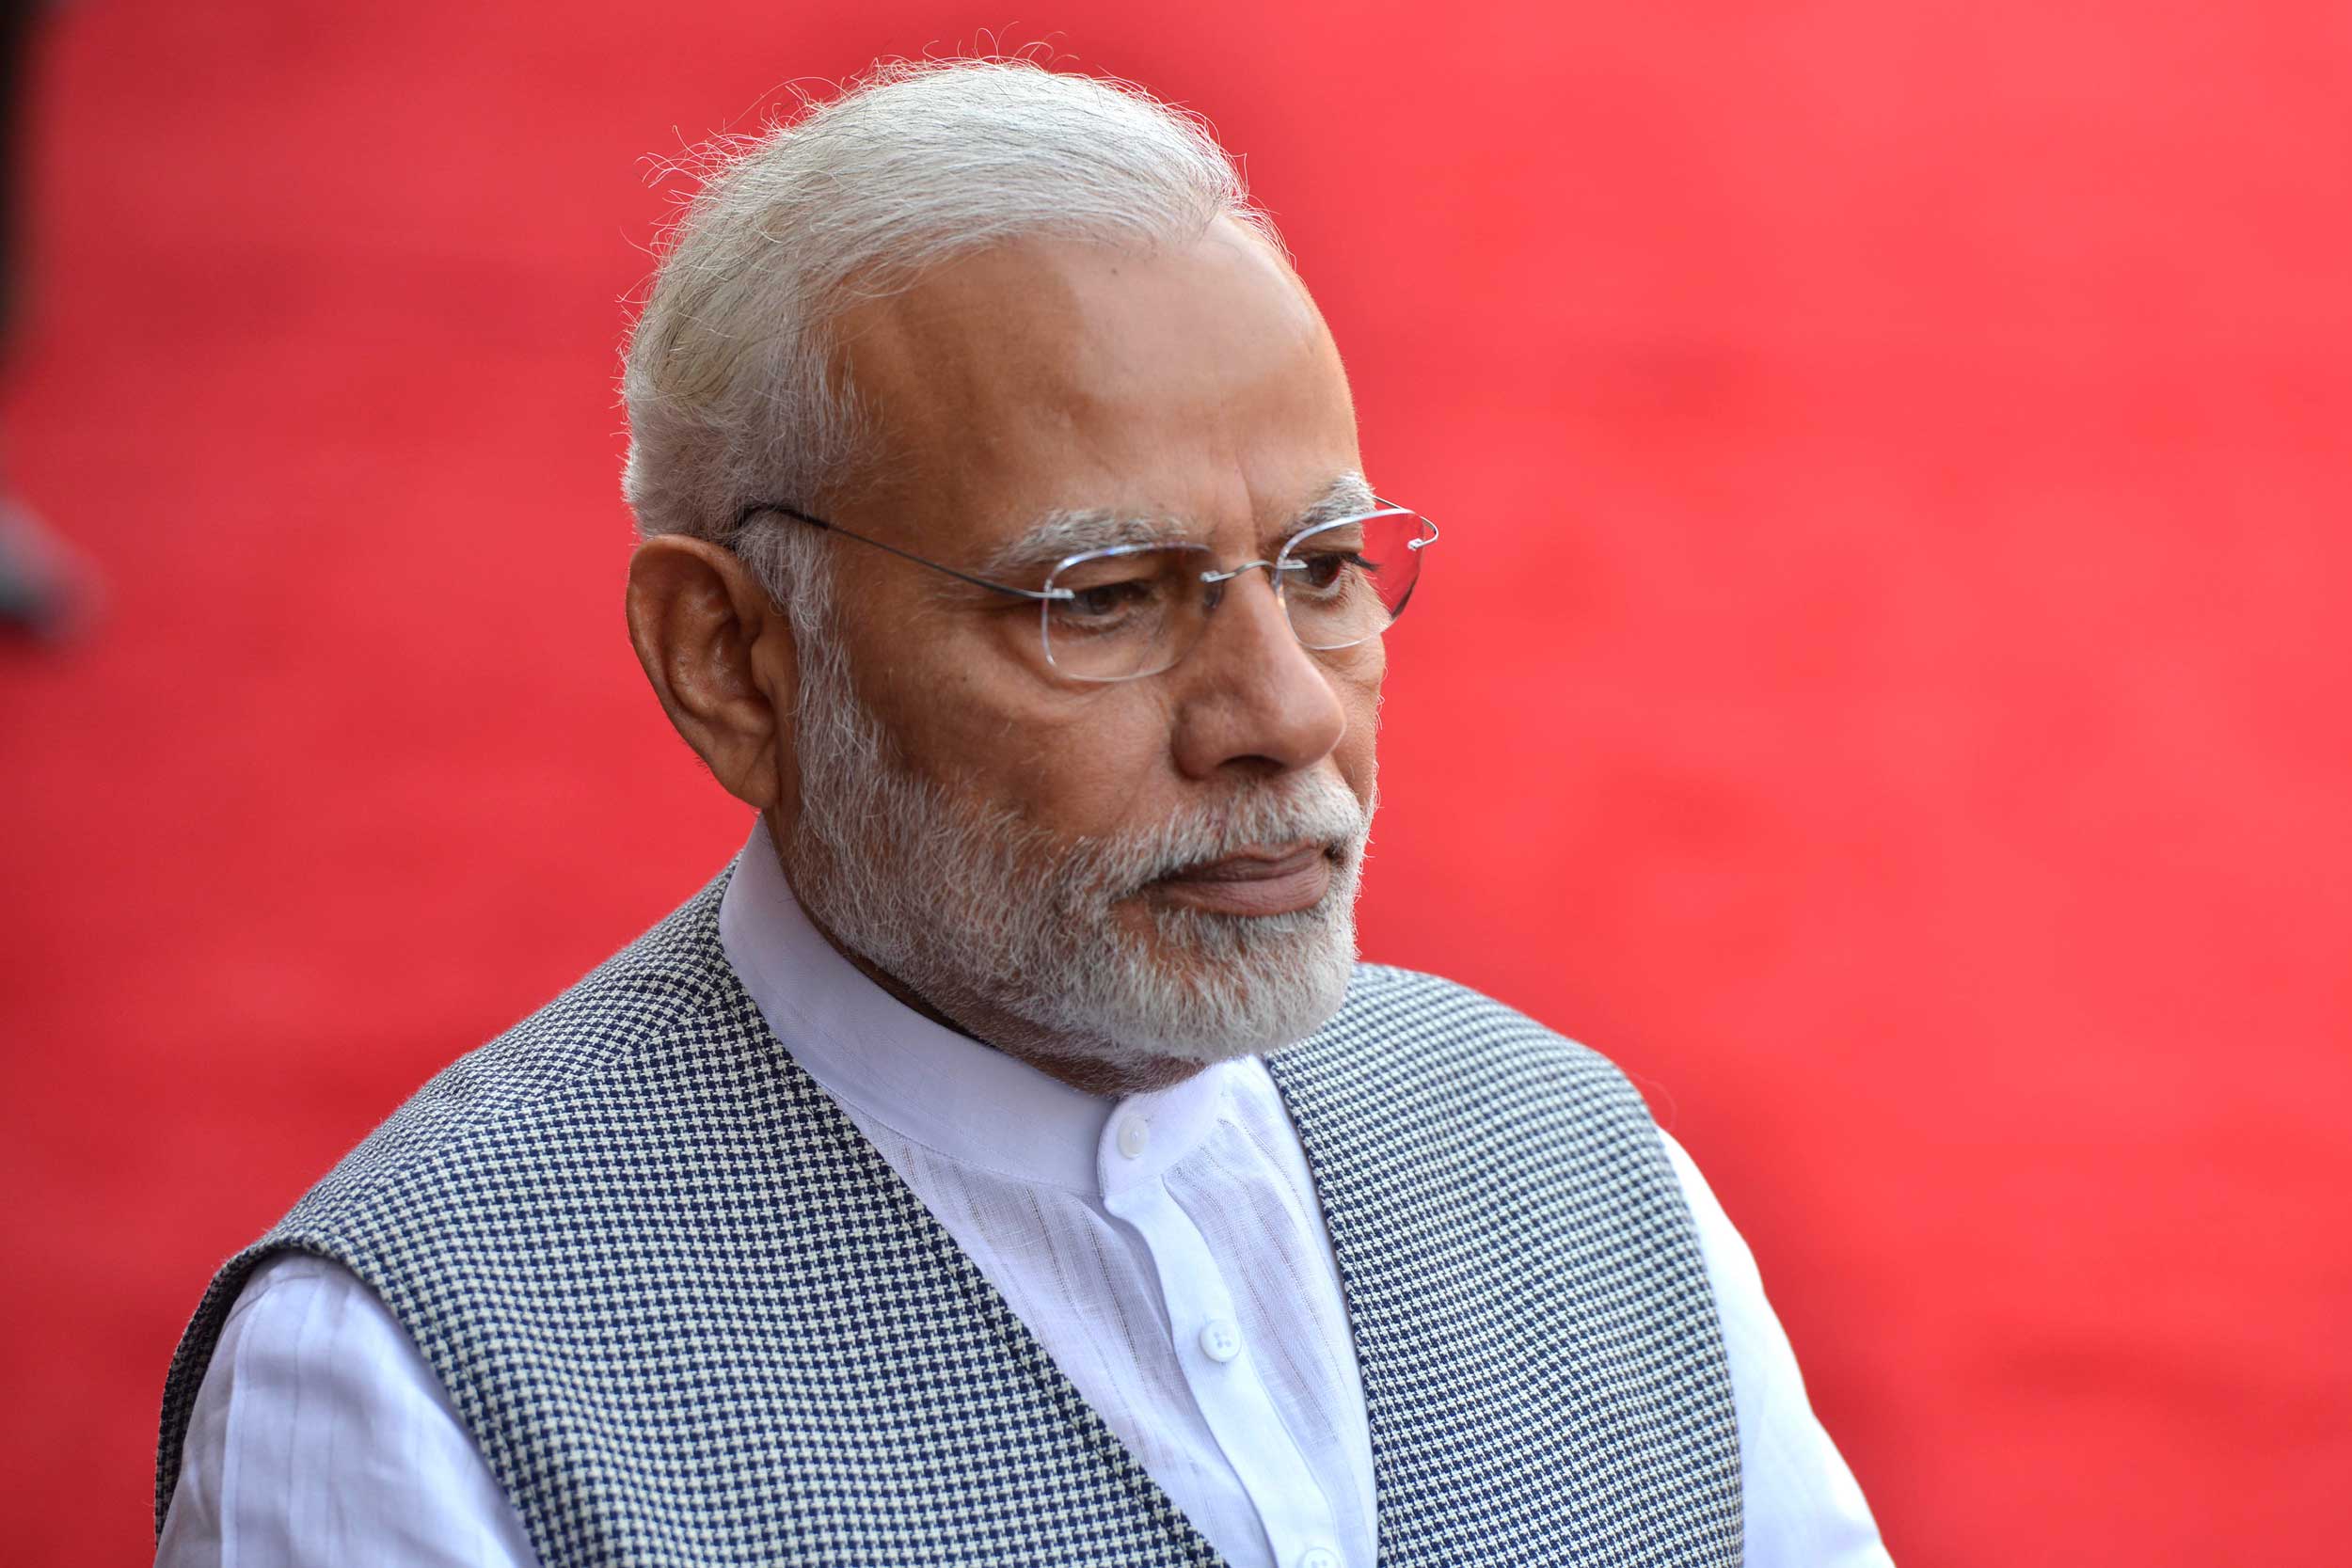 Corruption has been swatted away, claims Prime Minister Narendra Modi, who likes to project himself as a crusader against this vice. Mysteriously, India’s improvement on the corruption perception index has been minimal under his watch.